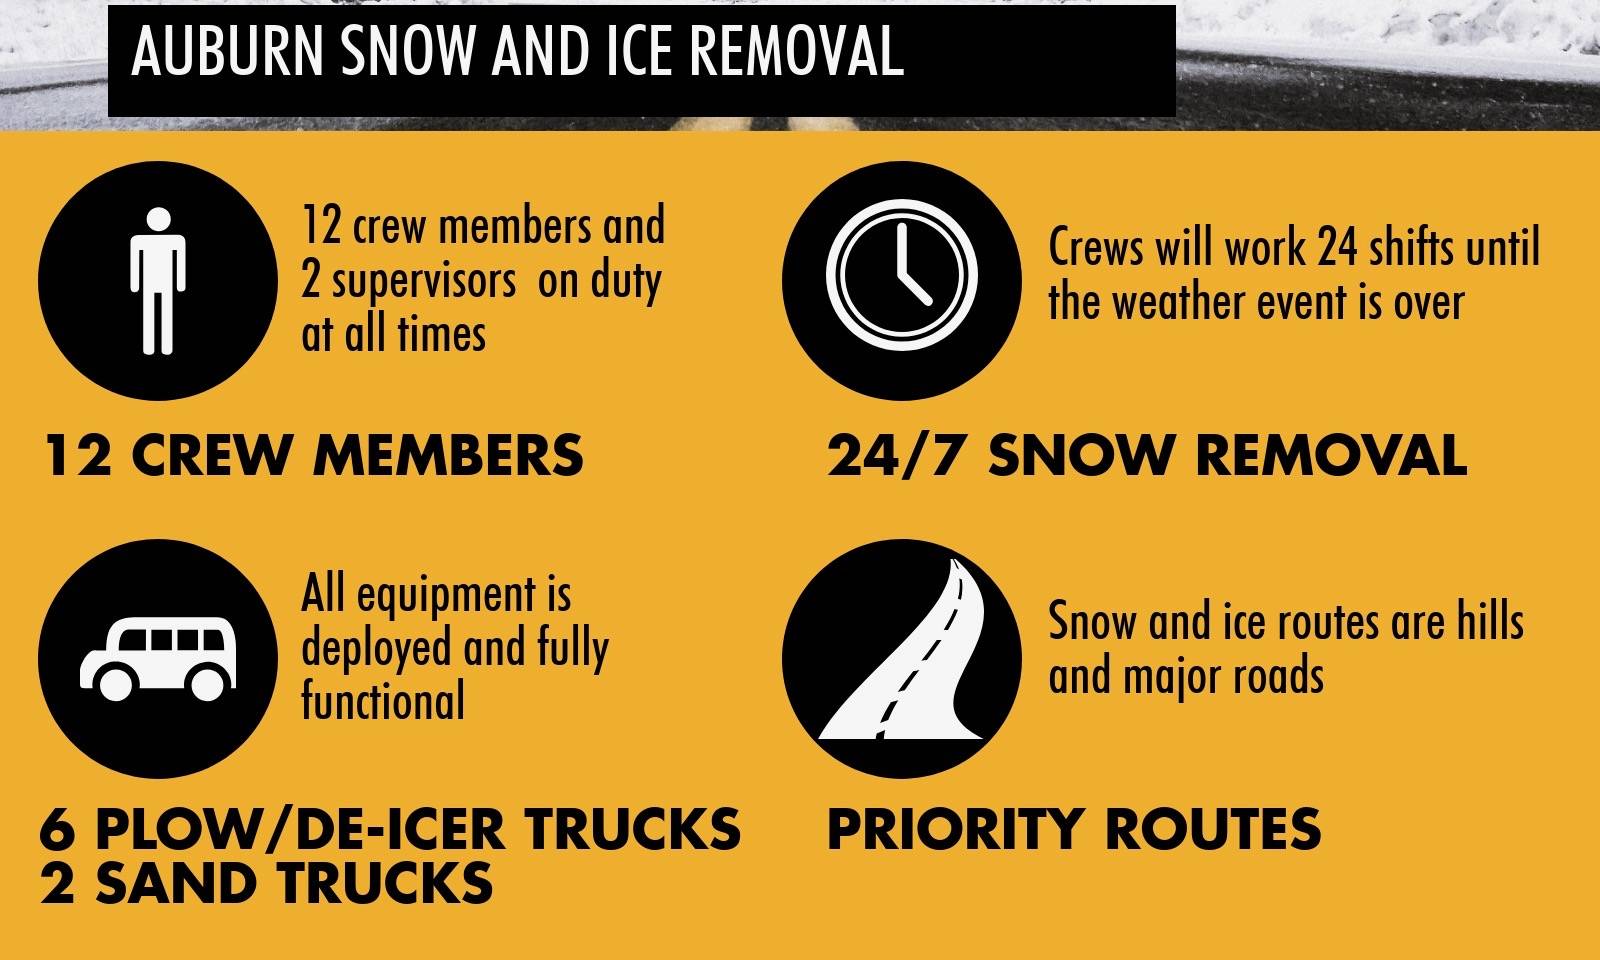 Crews and plows continue to monitor and service roads. COURTESY GRAPHIC, city of Auburn